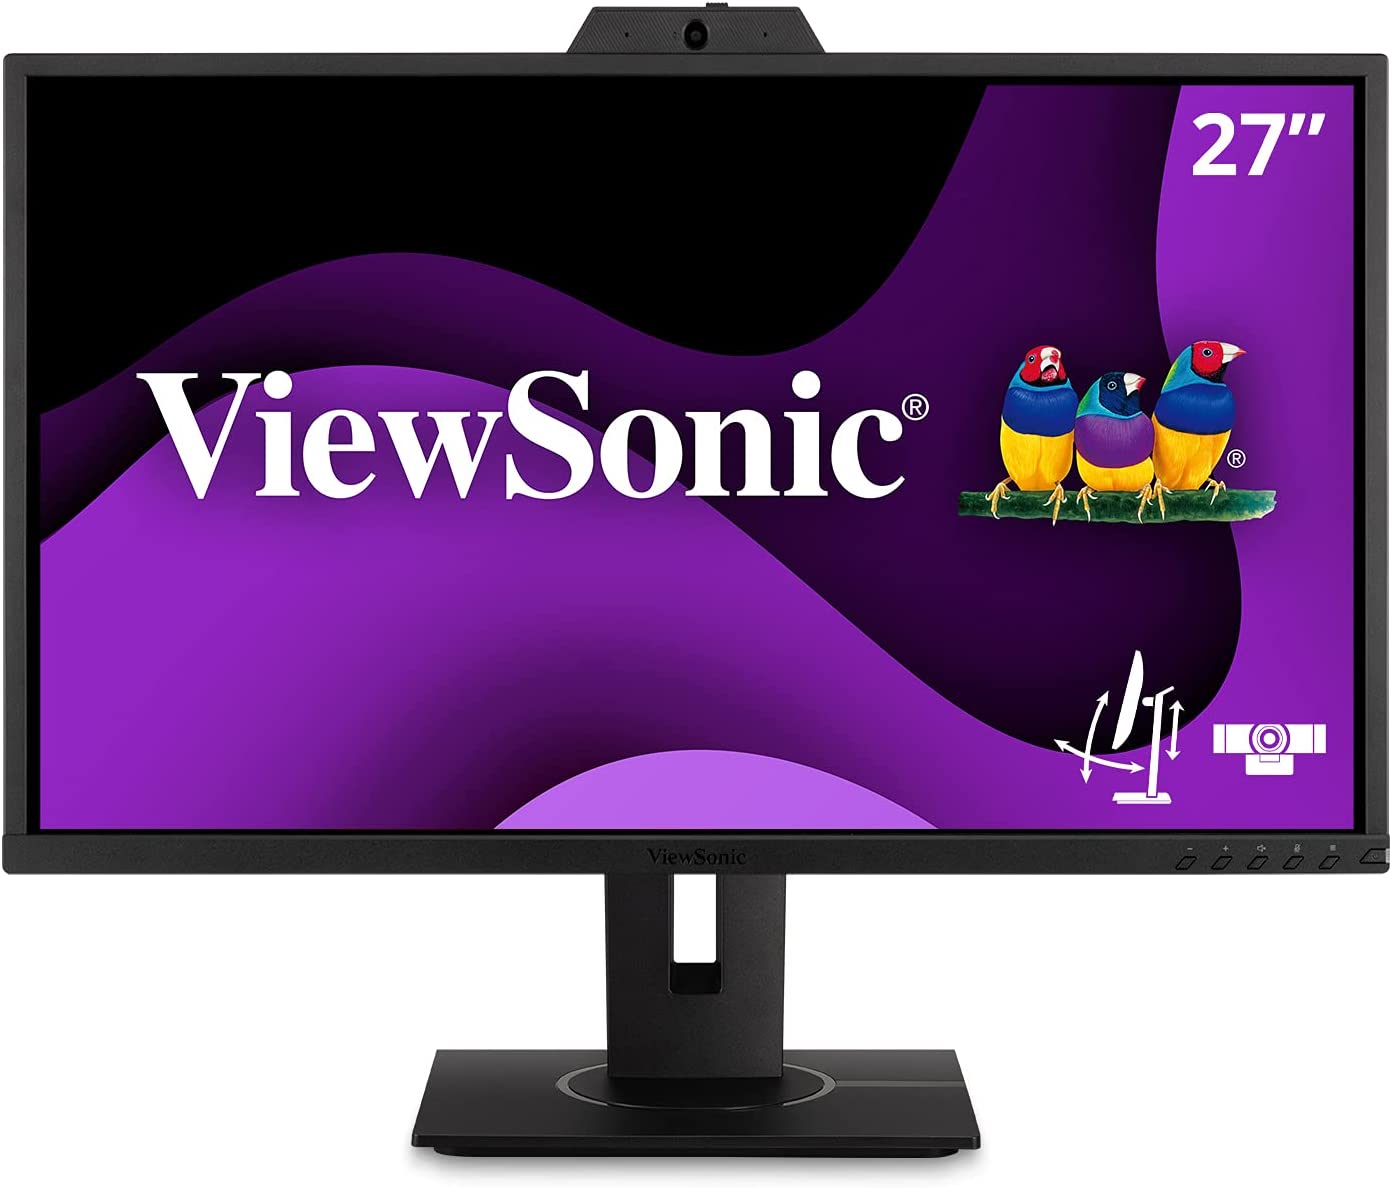 ViewSonic VG2740V 27 Inch 1080p IPS Video Conferencing-Monitor with Integrated 2MP-Camera, Microphone, Speakers, Eye Care, Ergonomic Design, HDMI DisplayPort VGA Inputs for Home and Office.